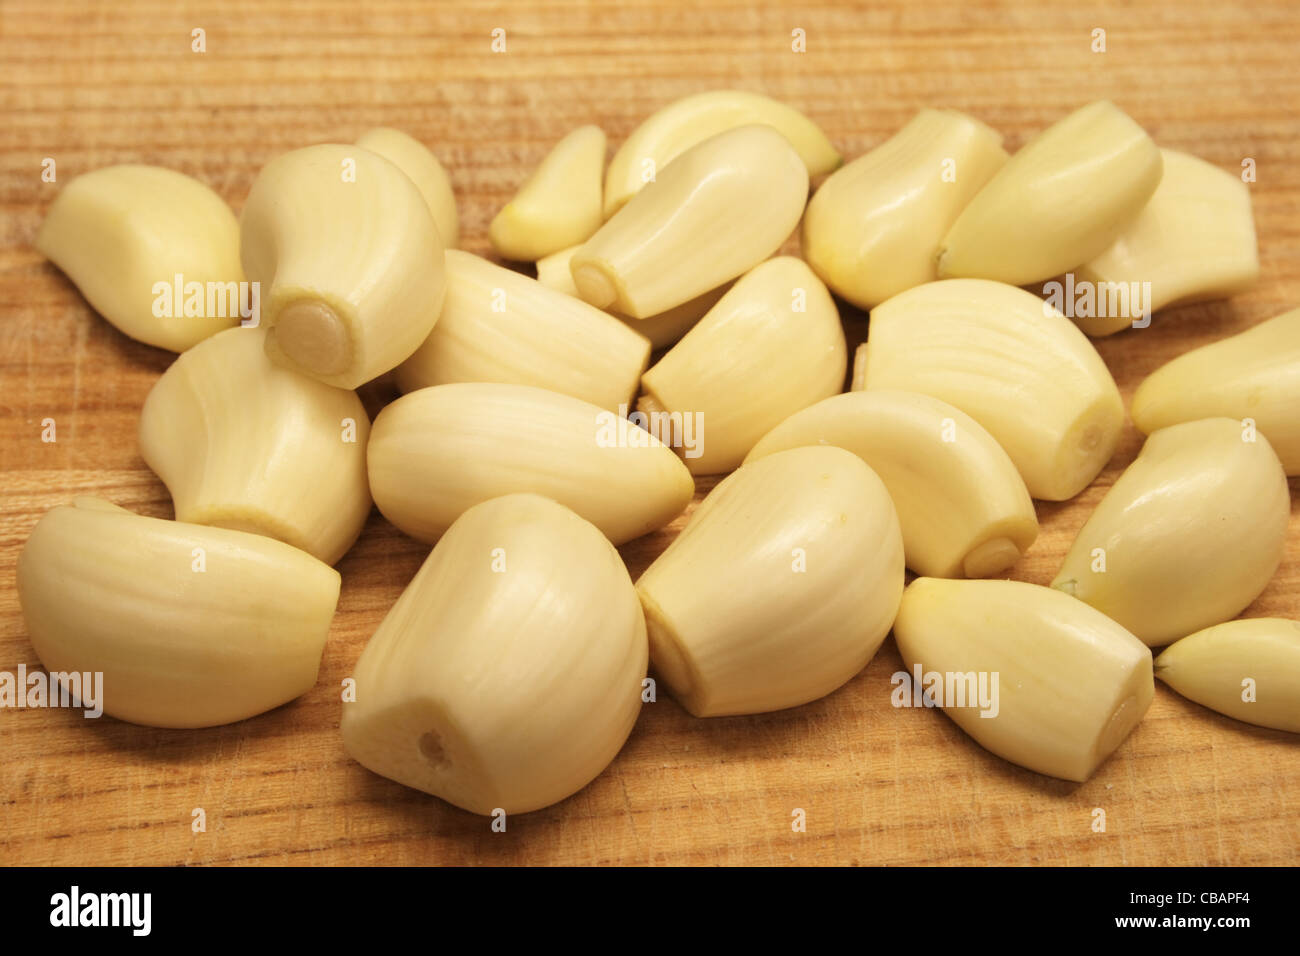 many trimmed peeled garlic cloves on a wooden cutting board Stock Photo